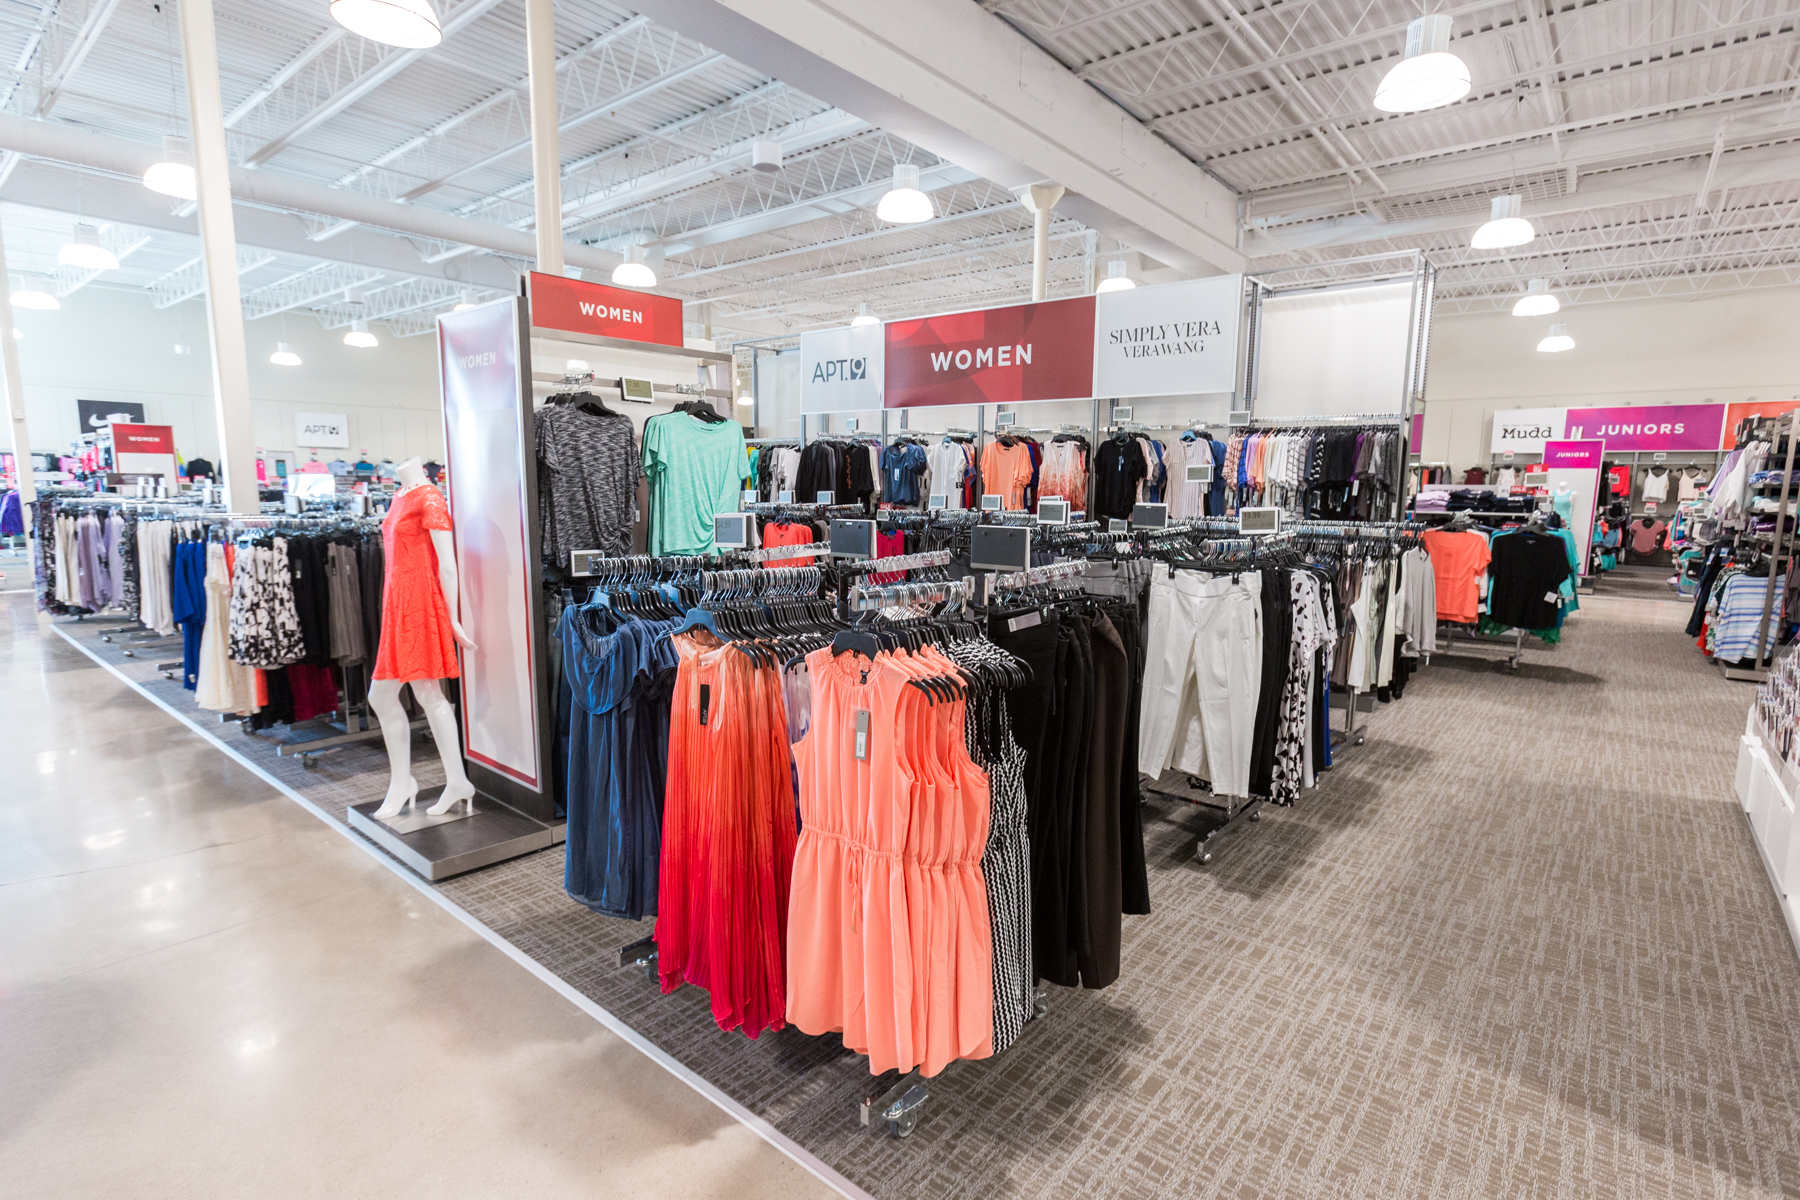 Kohl's is trying to make its stores a destination again post-pandemic